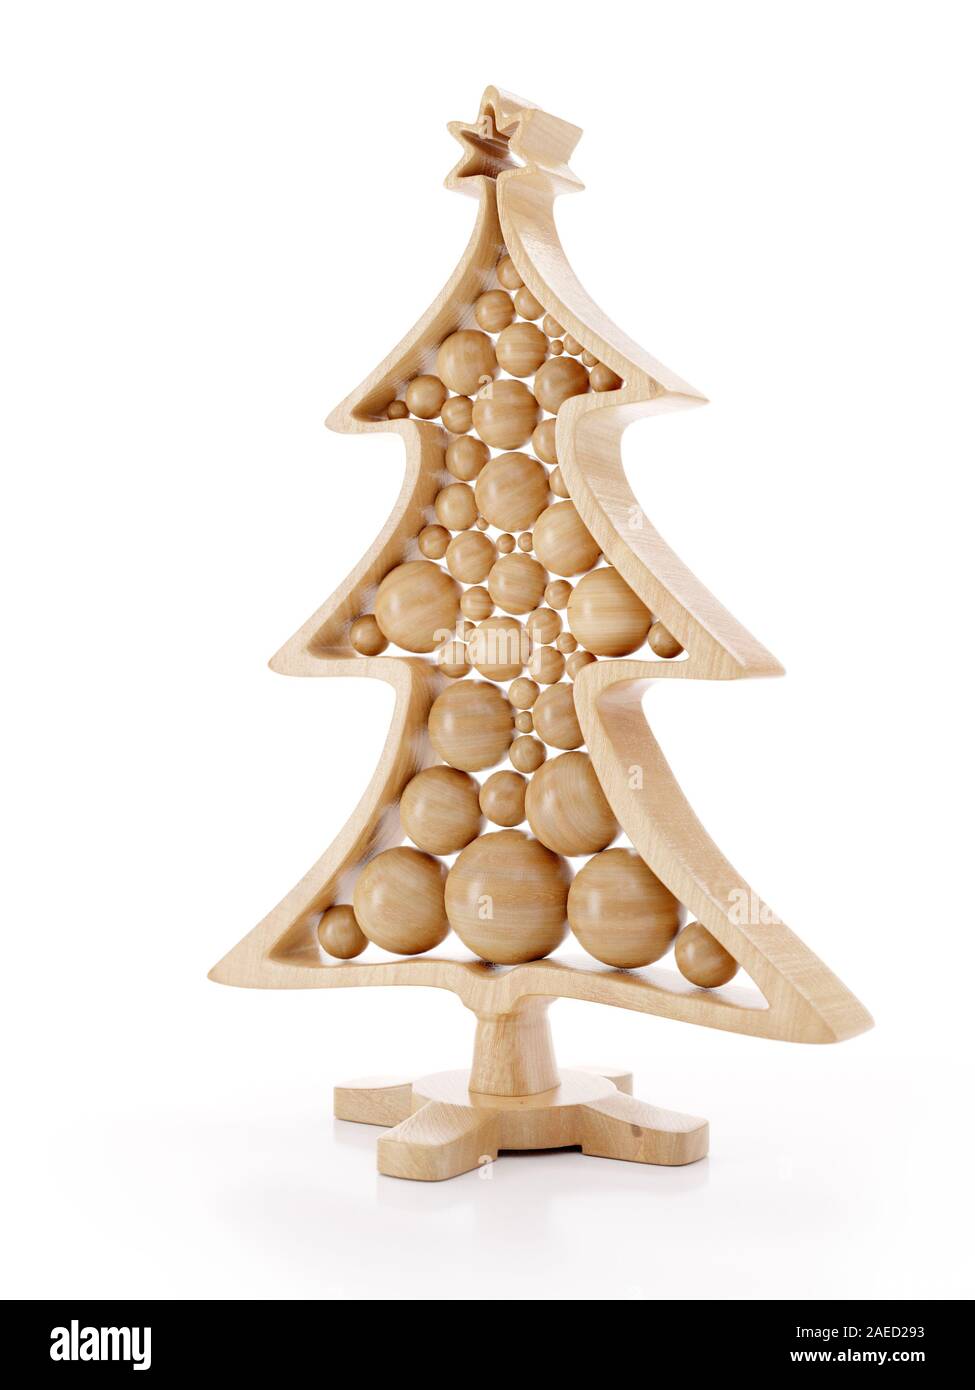 3D render of wooden christmas tree with balls on stand over white background Stock Photo